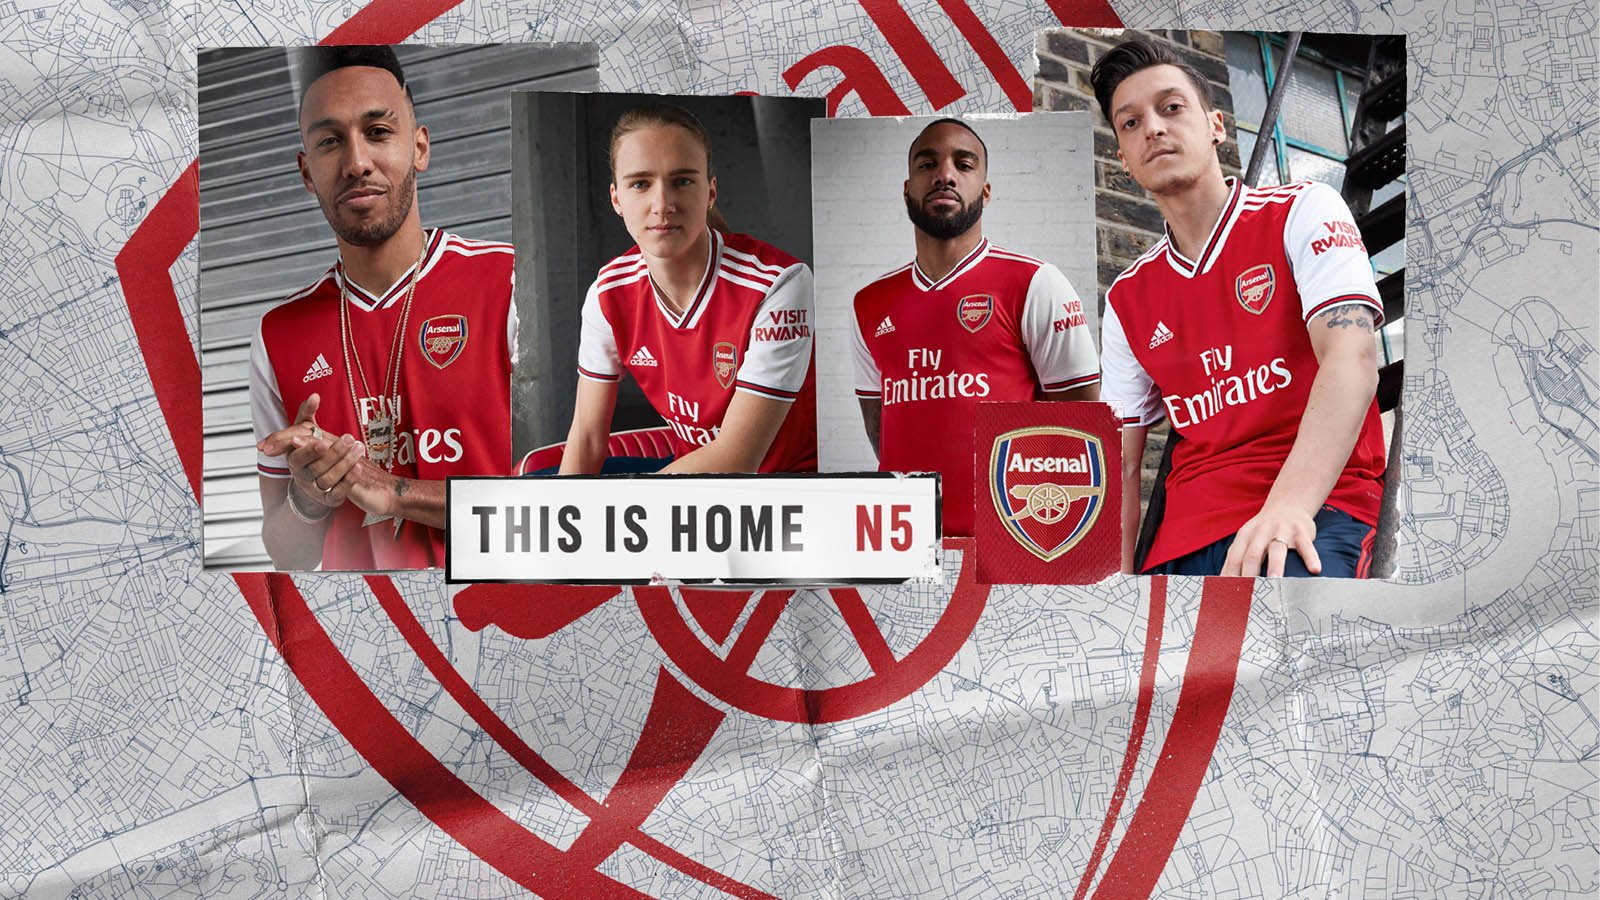 adidas and Arsenal launch new home kit 